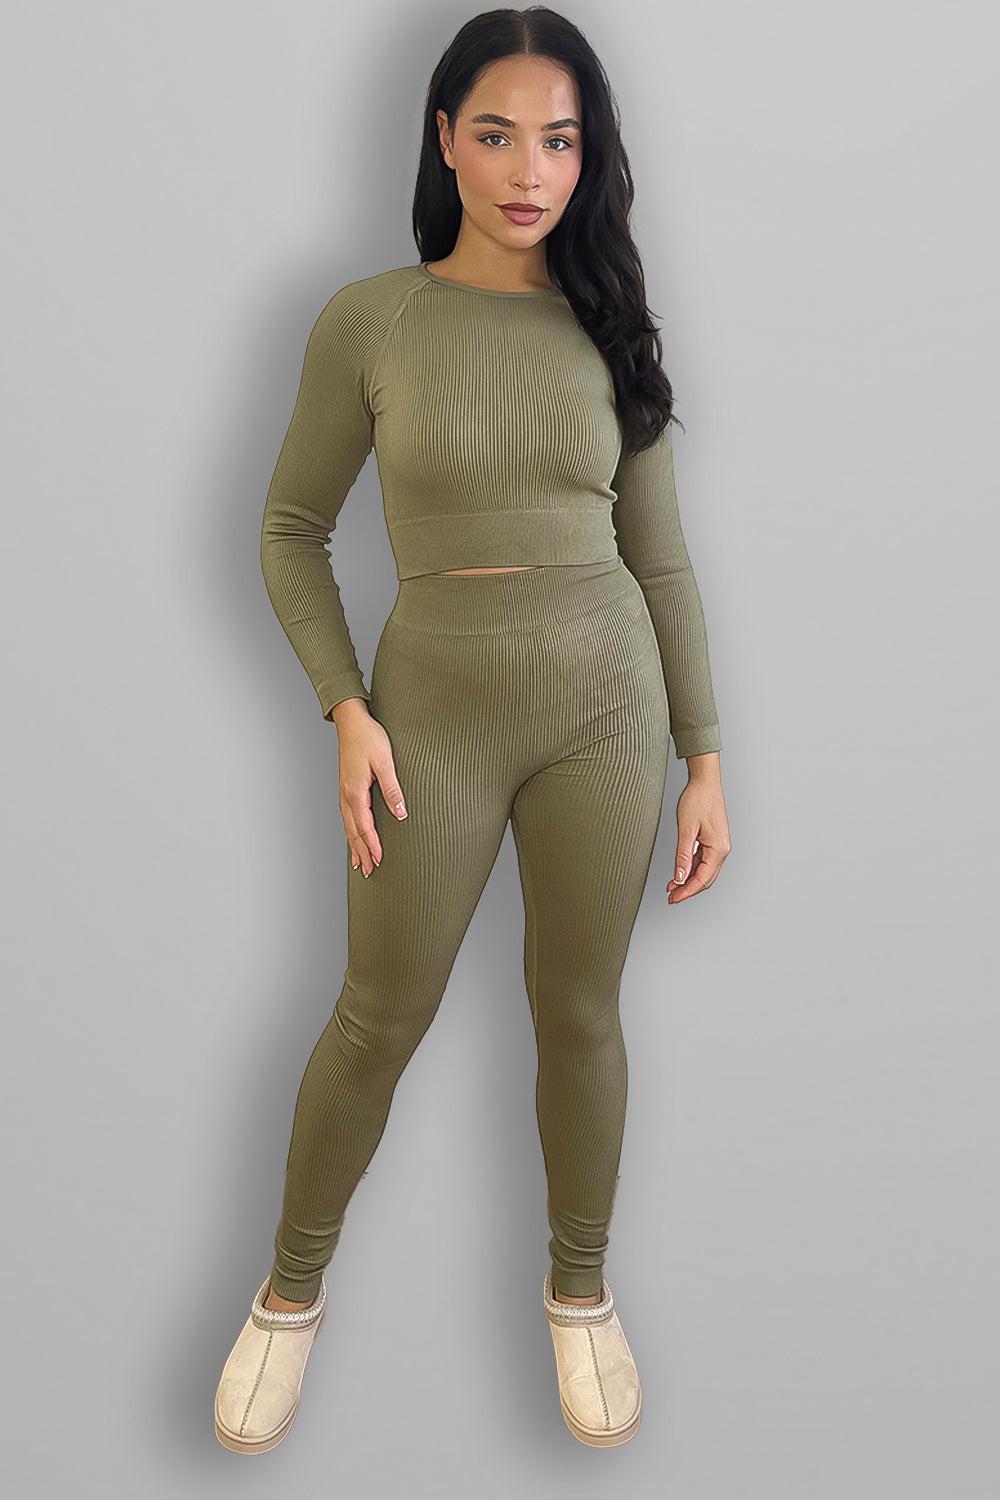 Stretchy Ribbed Long Sleeve Top and Leggings Activewear Set